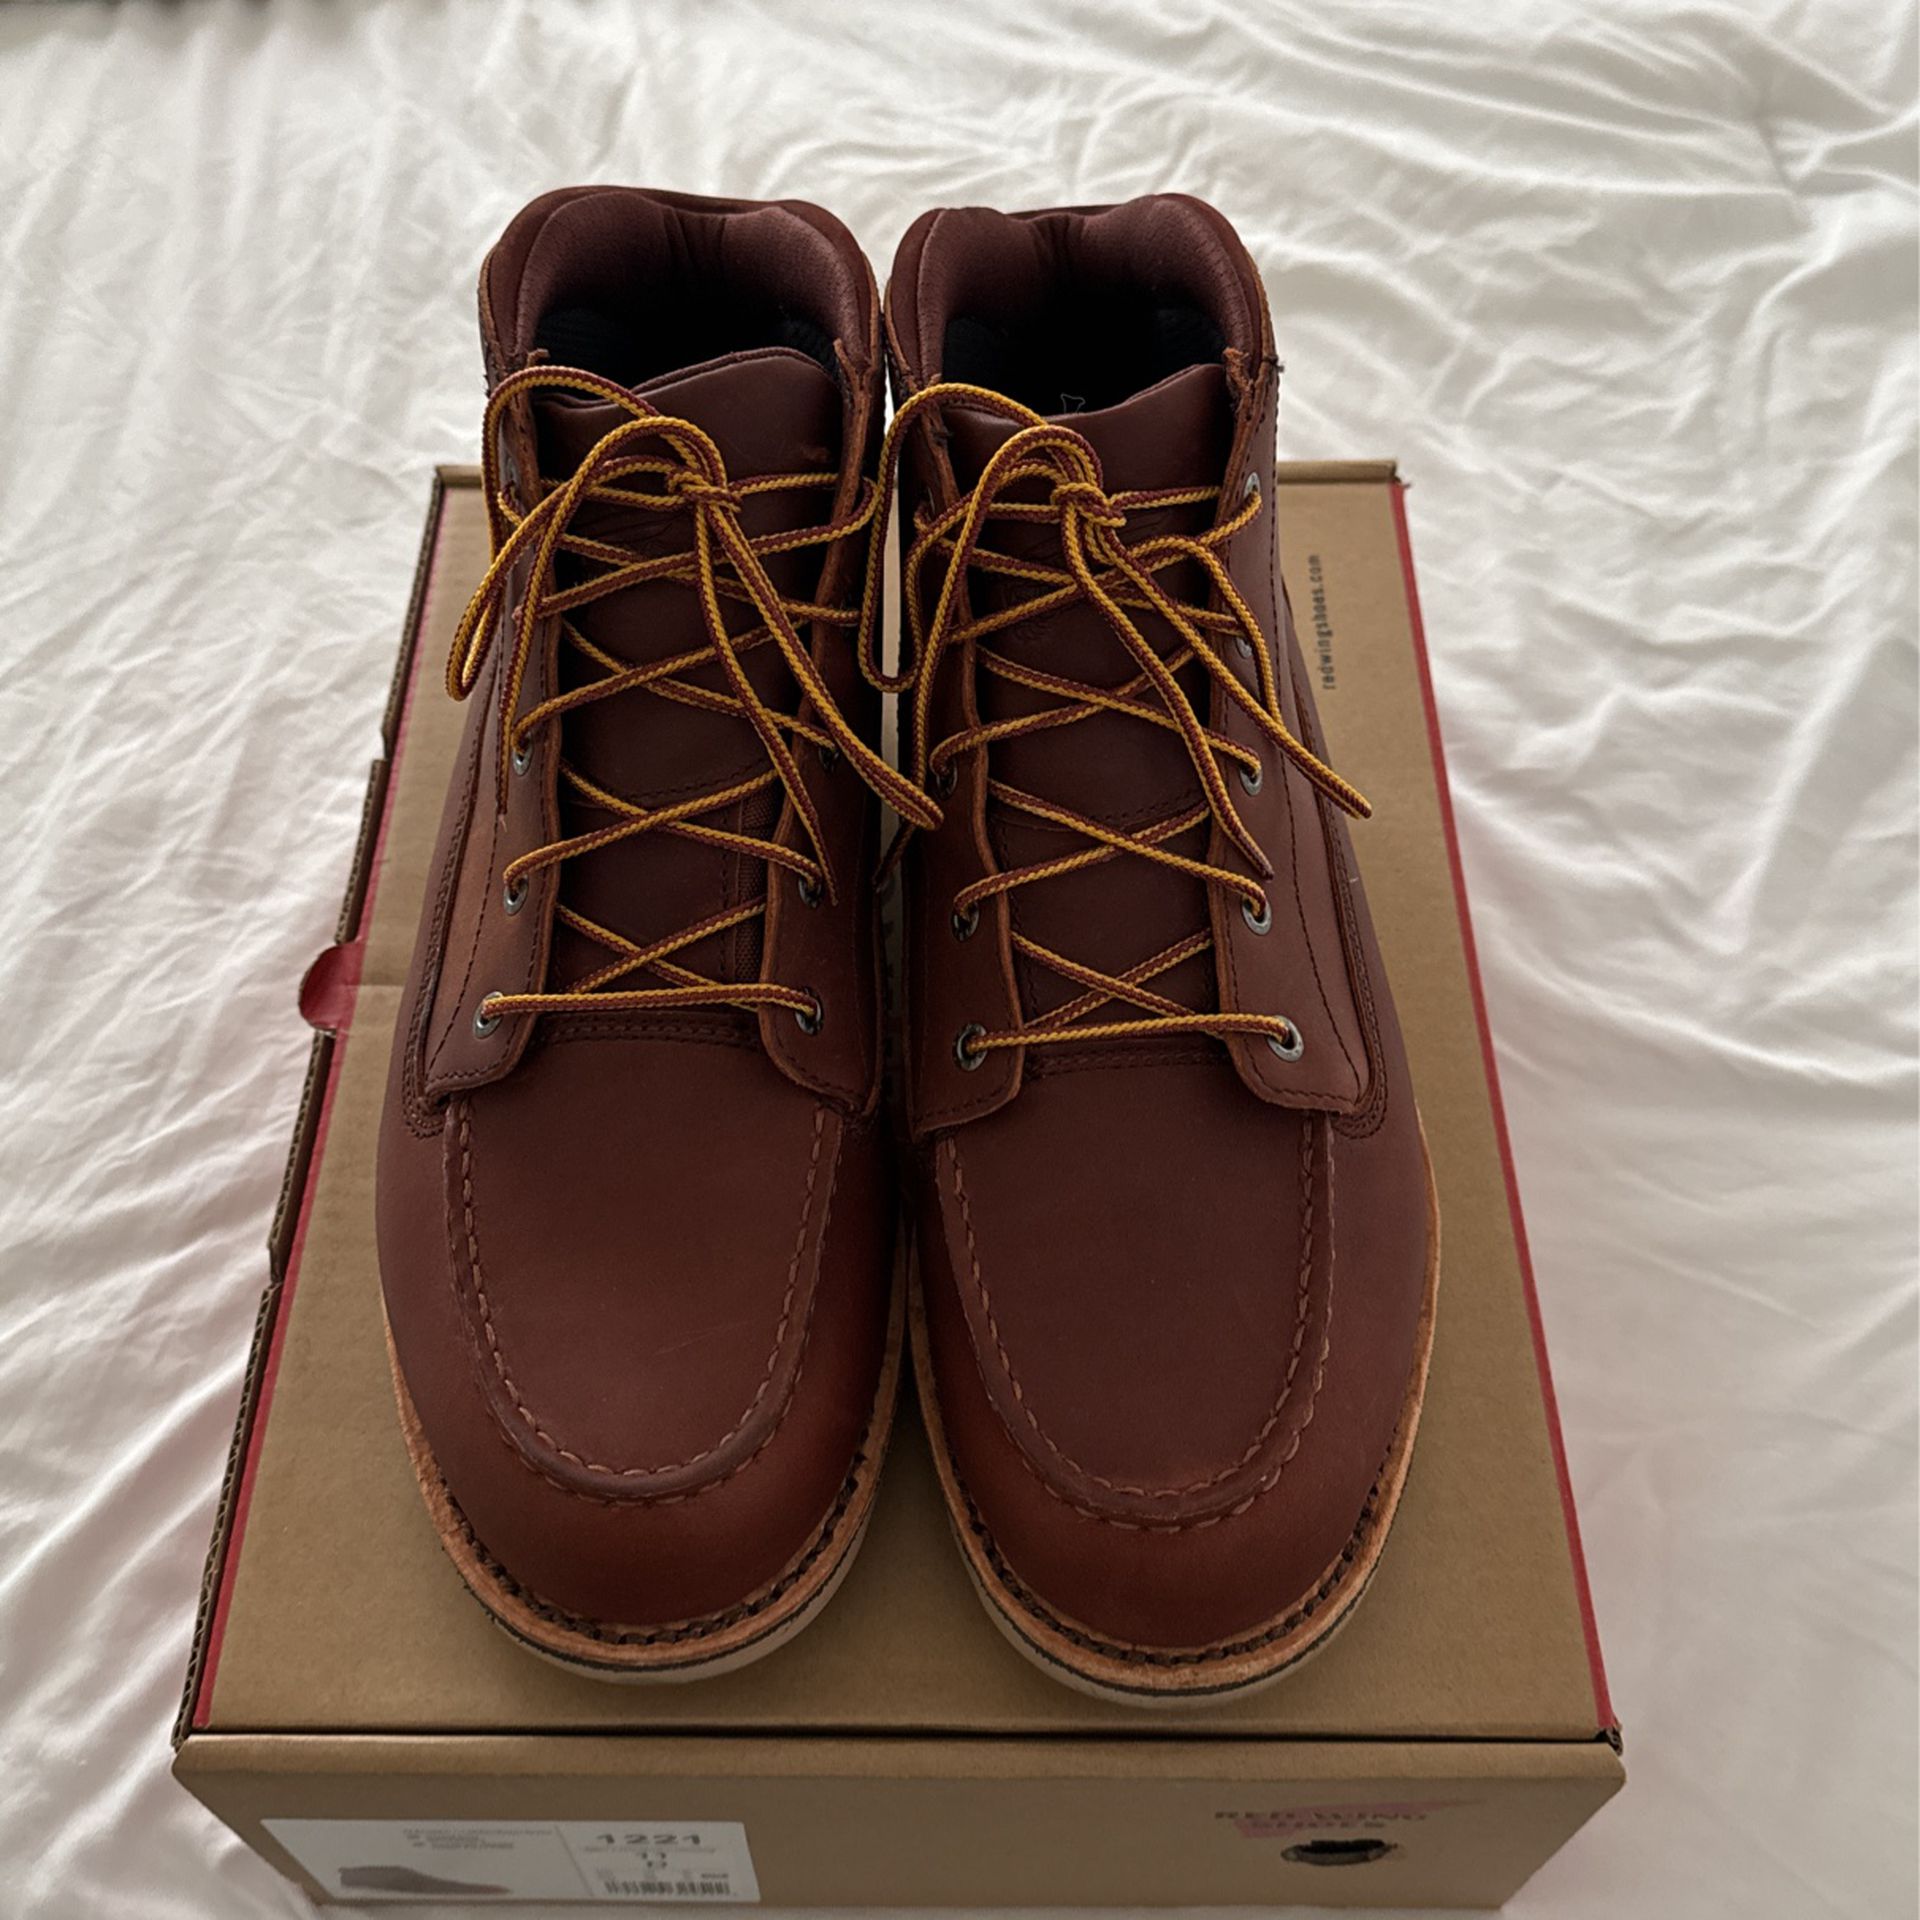 RED WING Model 1221 Size 11D Soft Toe for Sale in Clovis, CA - OfferUp